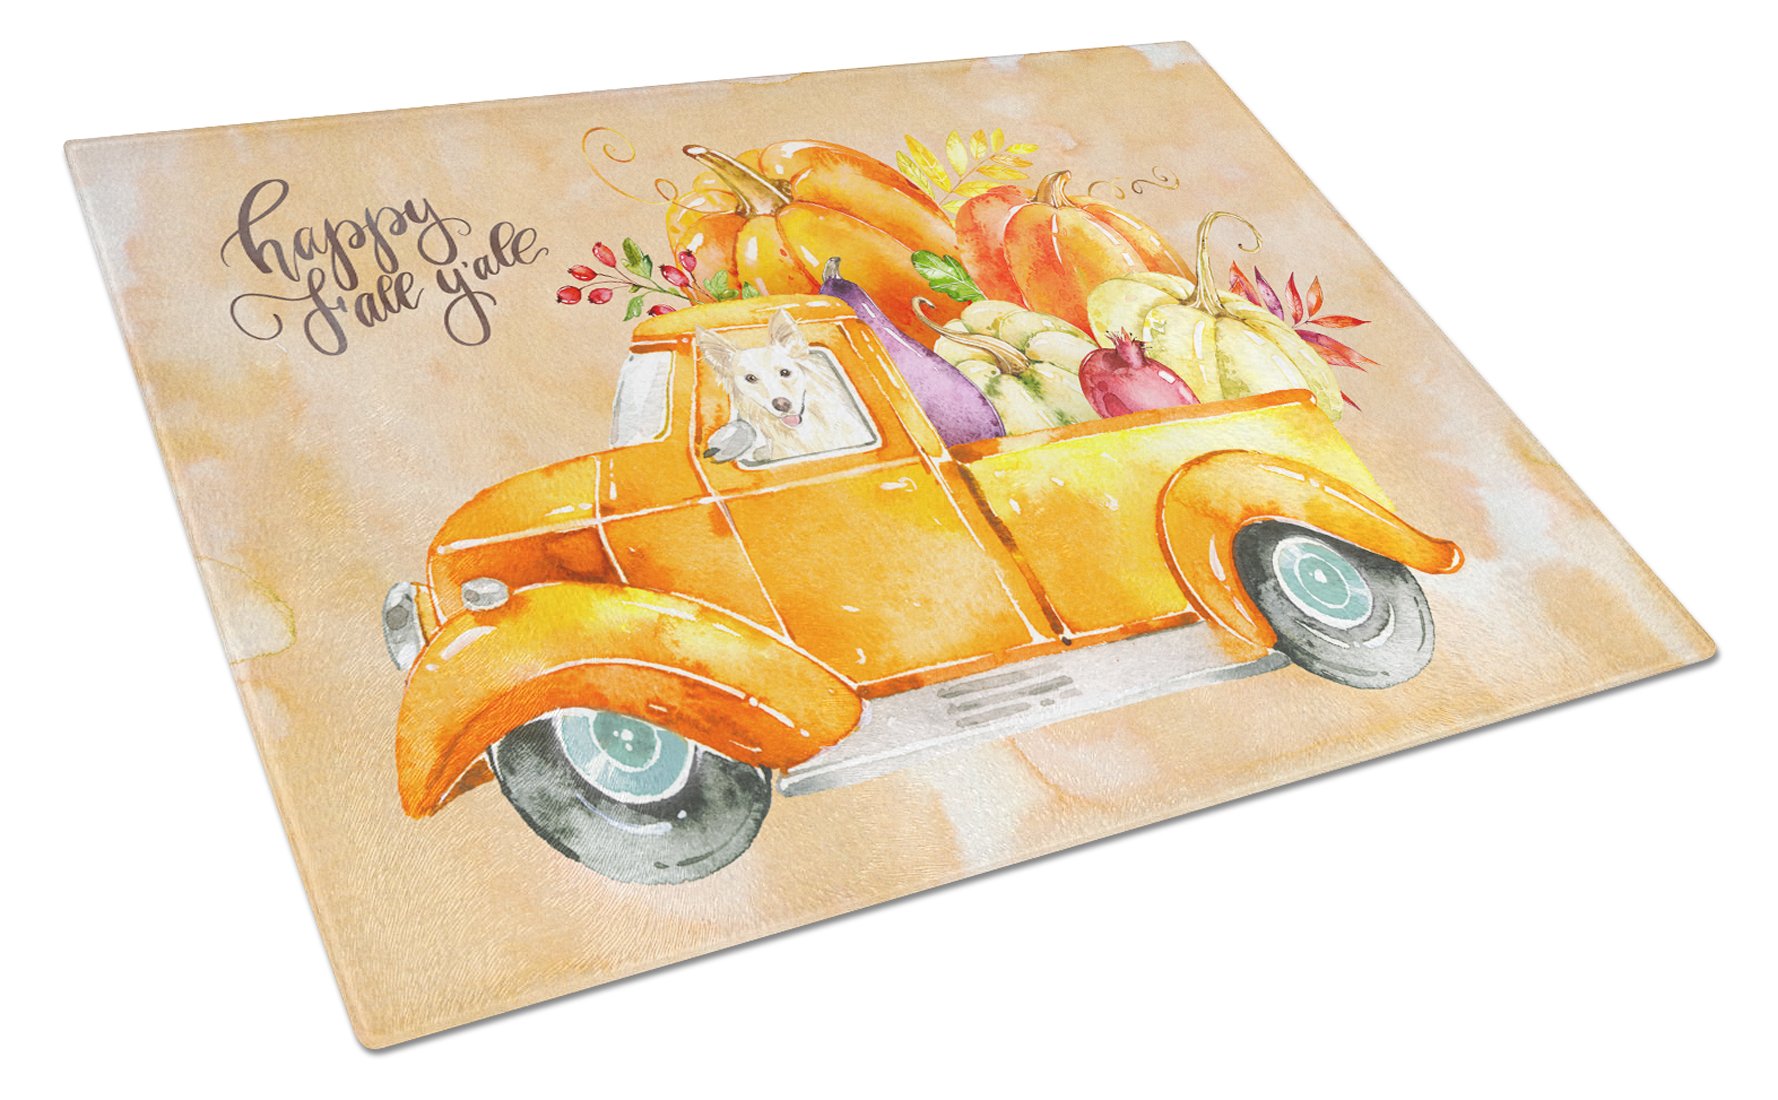 Fall Harvest White Collie Glass Cutting Board Large CK2641LCB by Caroline's Treasures